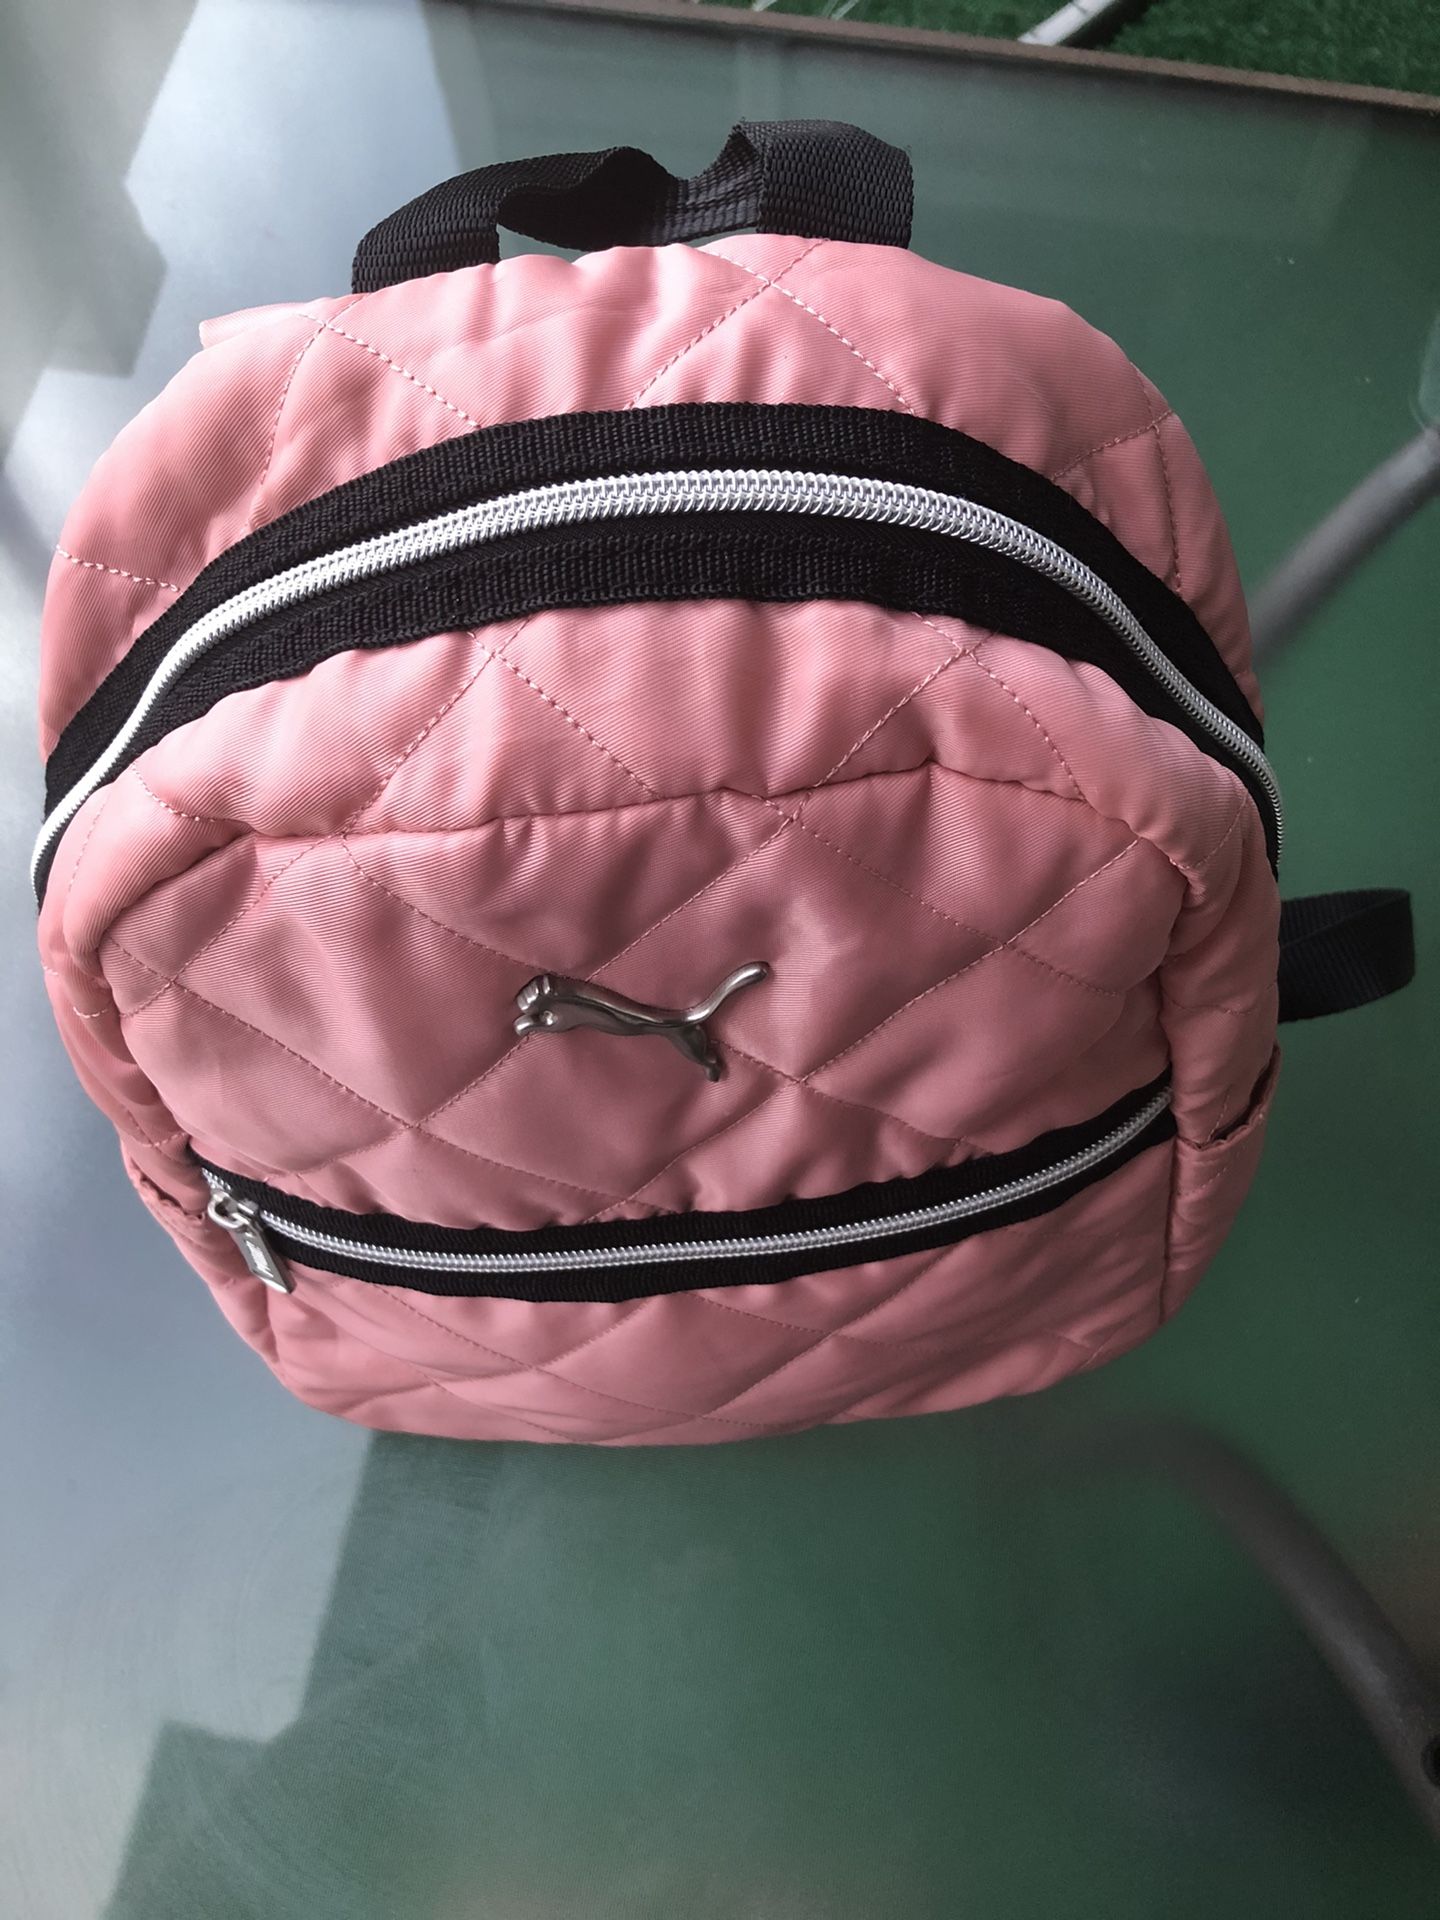 PUMA BACKPACK FOR WOMEN SMALL AND CUTE